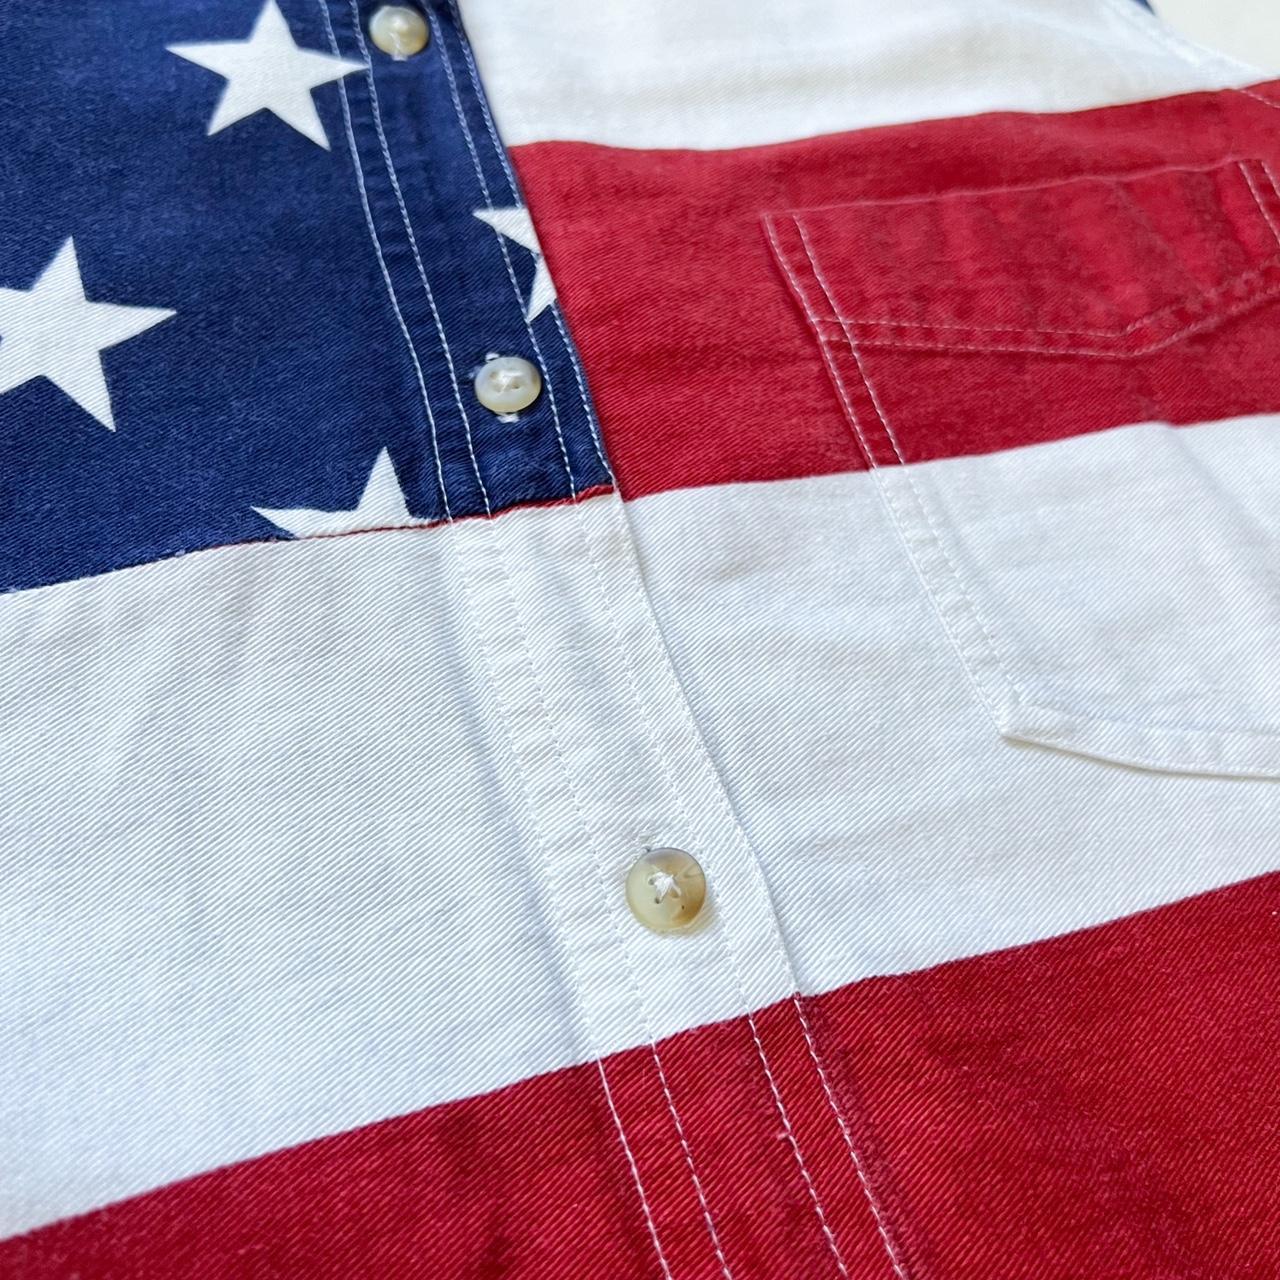 Product Image 4 - Vintage American Flag Shirt

90s American